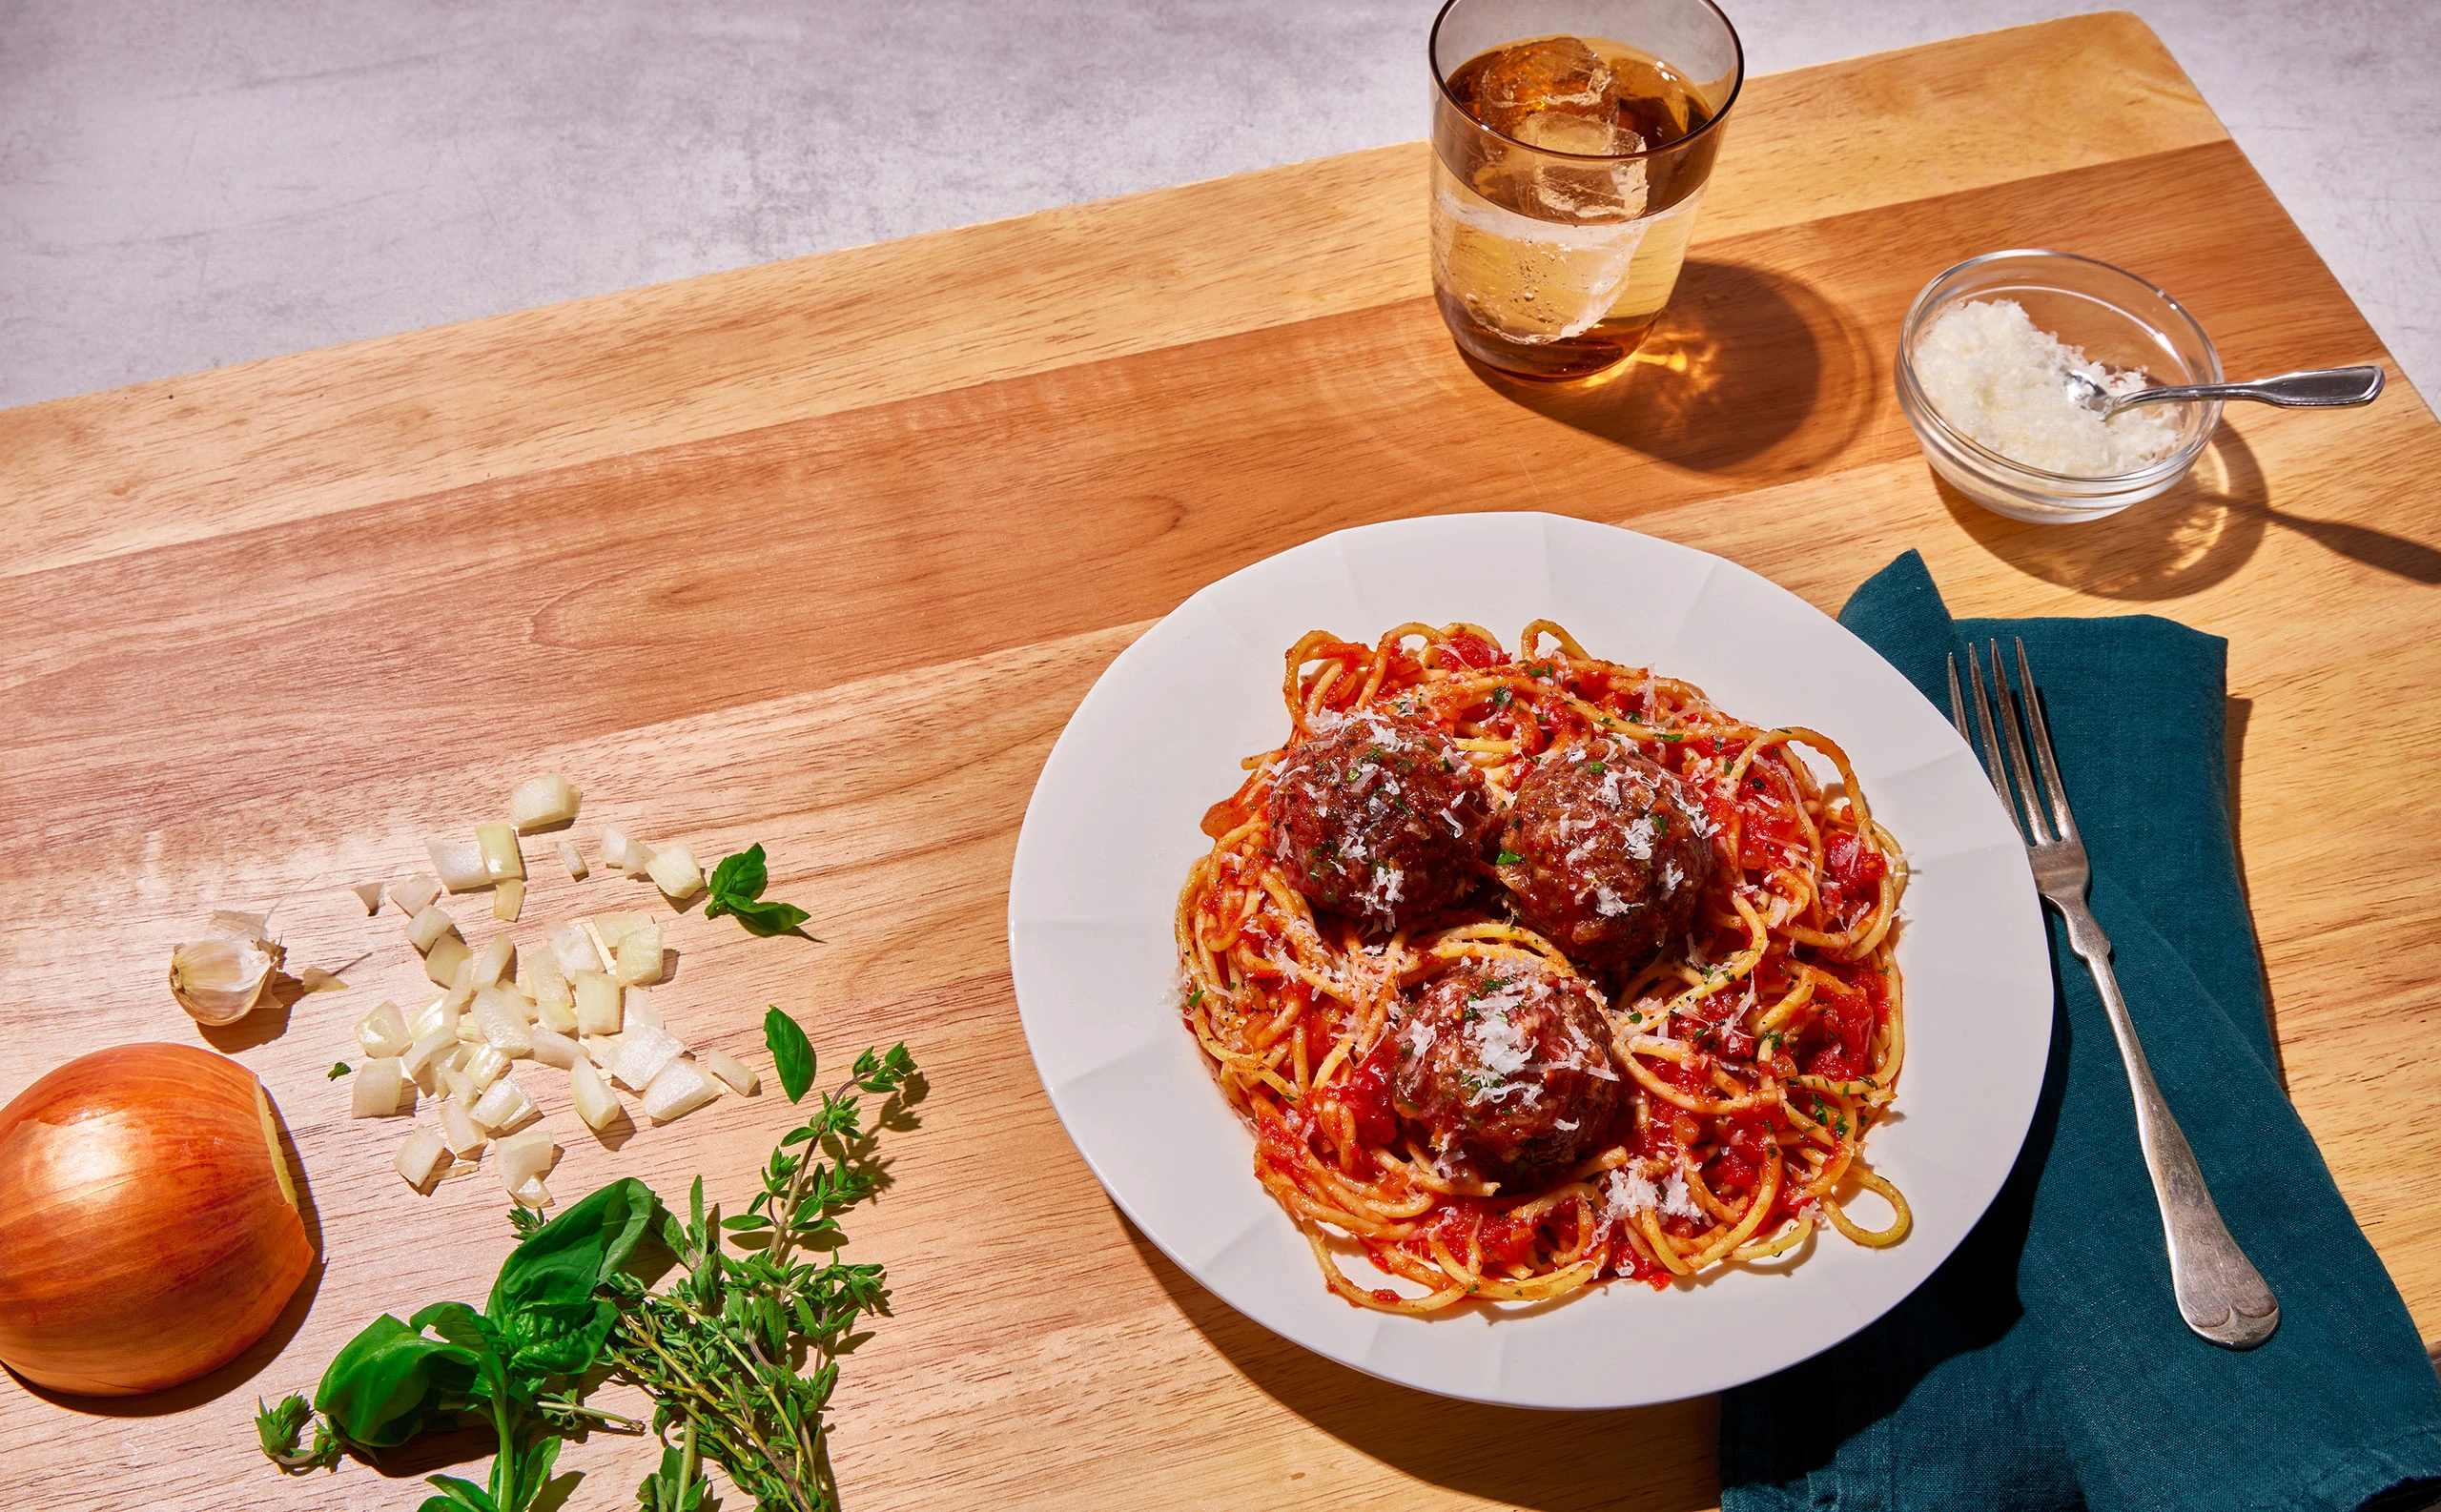 Meatballs made with Impossible Foods heart-healthy Impossible Beef.